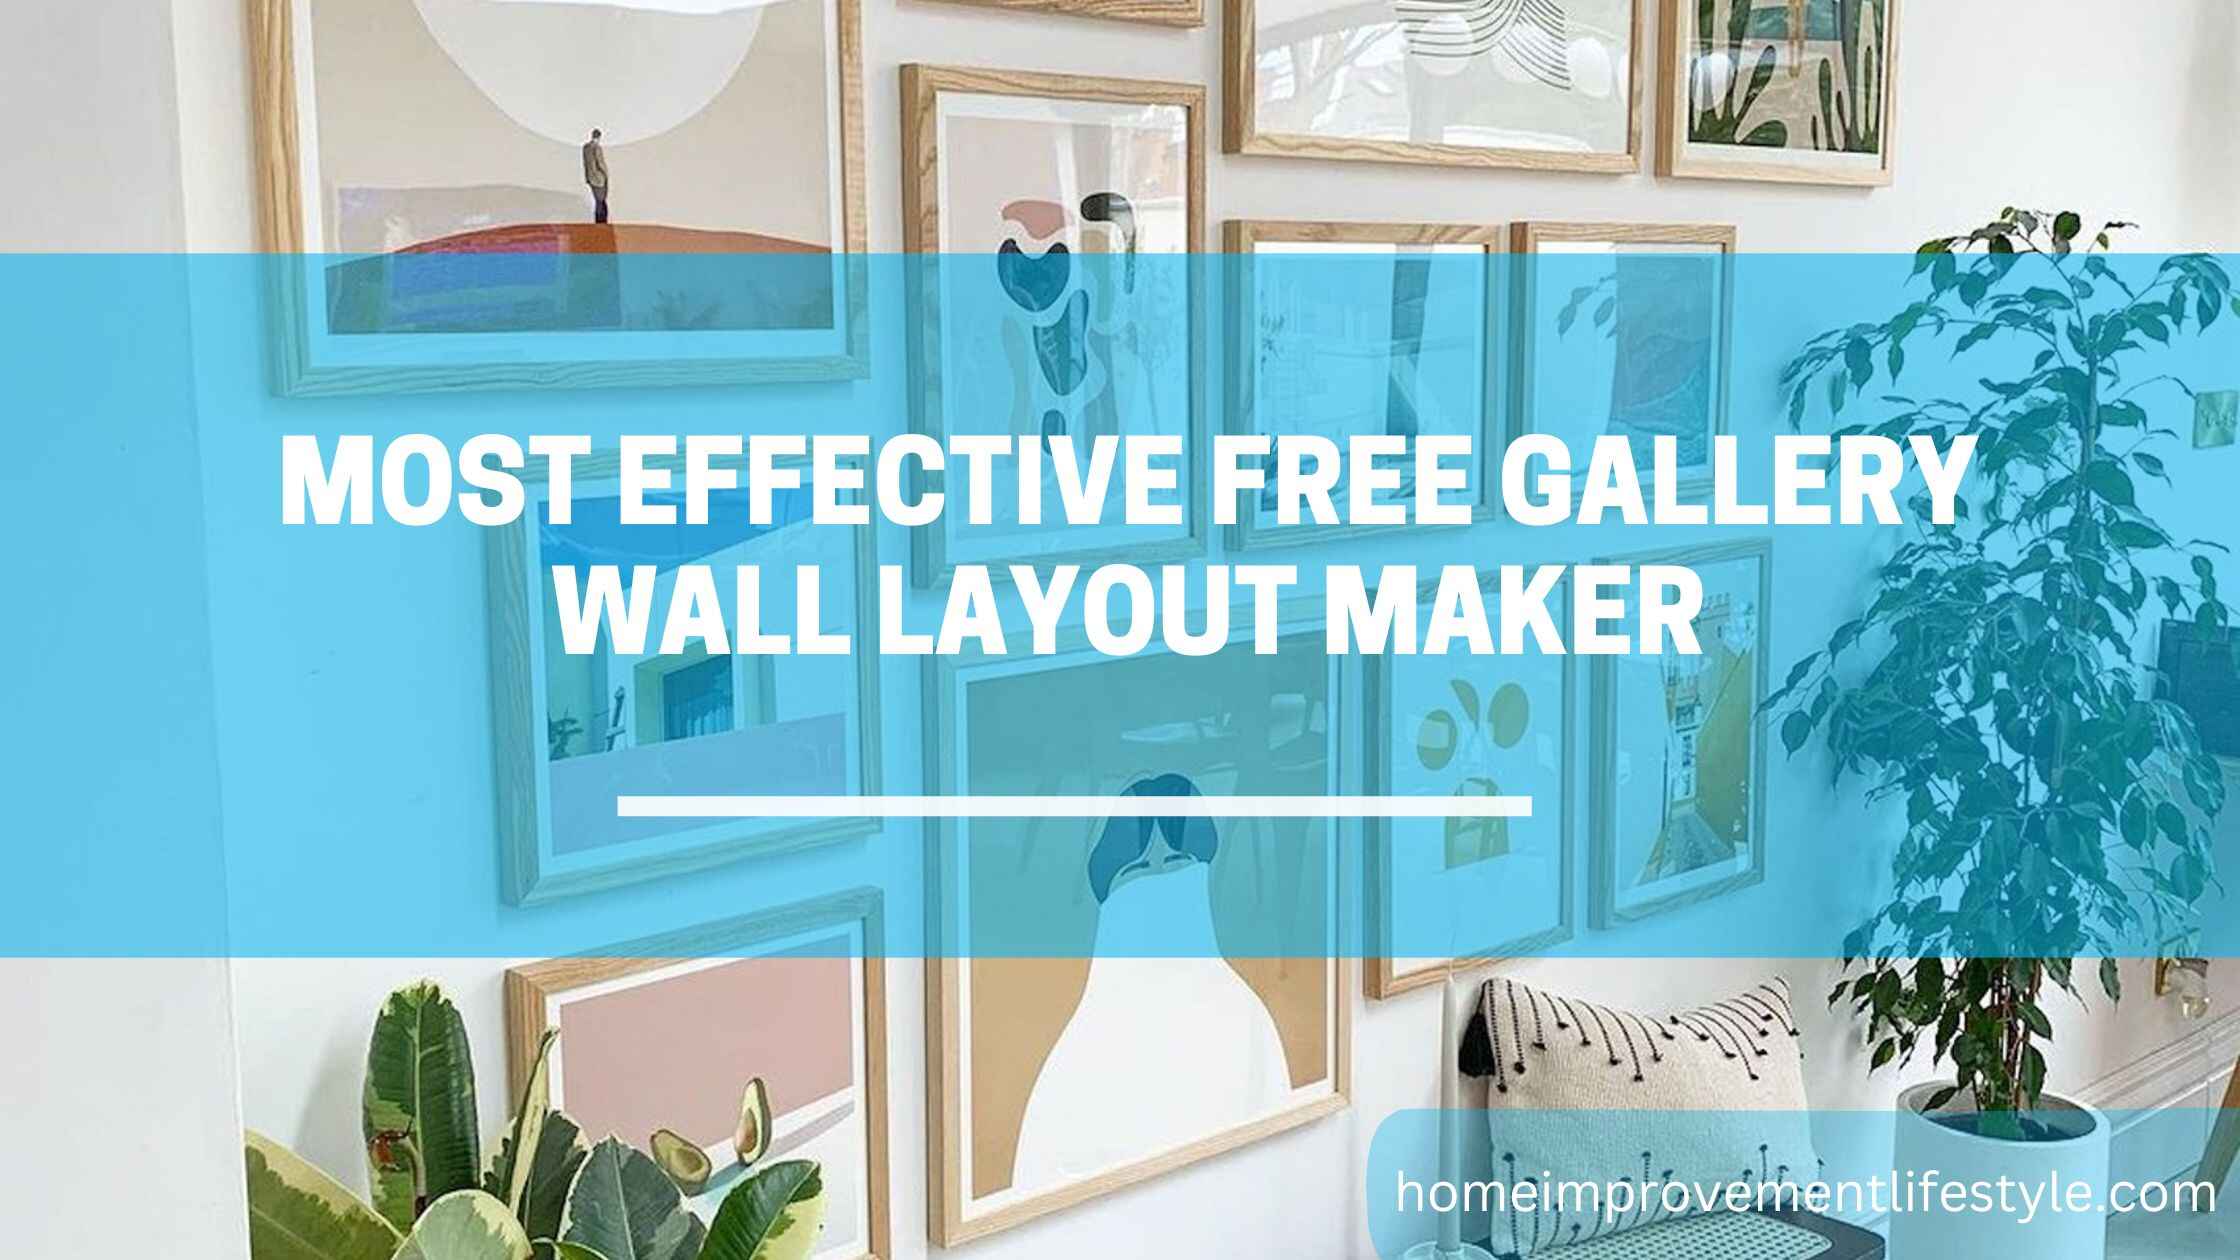 Most Effective Free Gallery Wall Layout Maker